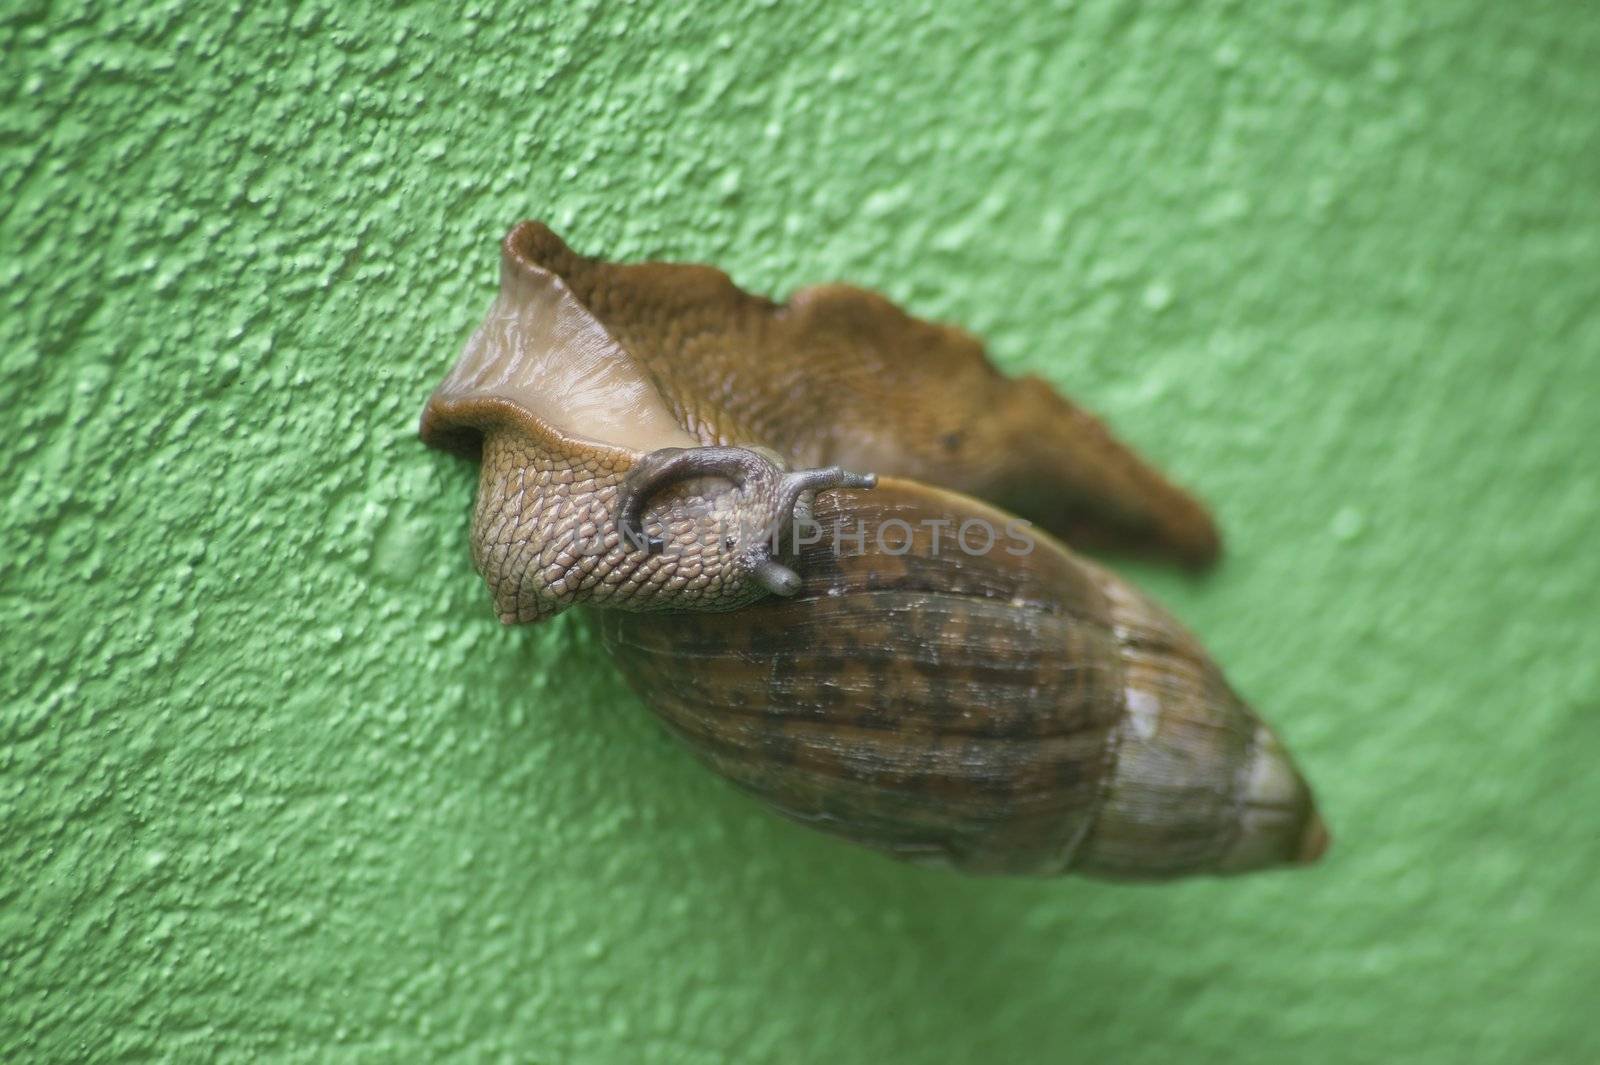 Arboreal snail from Costa Rica on a green wall.